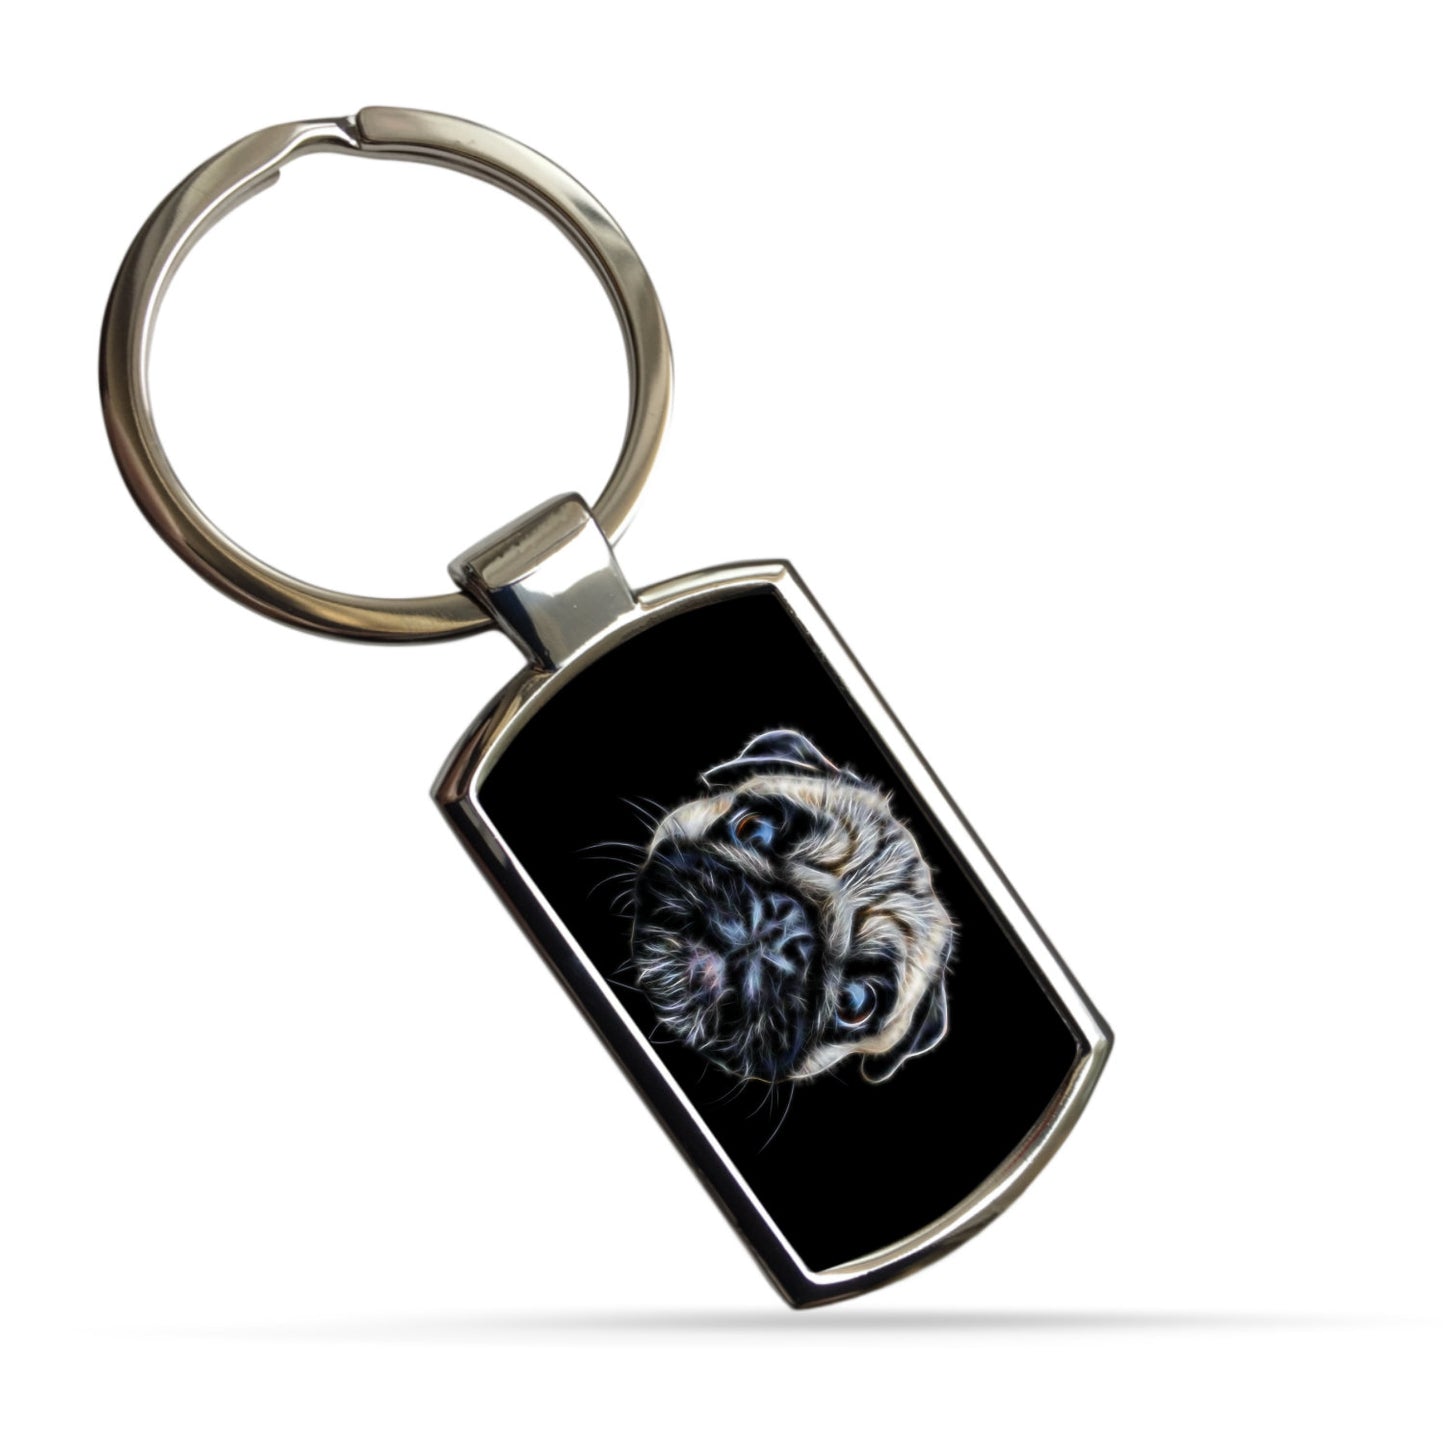 Pug Keychain with Stunning Fractal Art Design. Fawn and Black Designs.